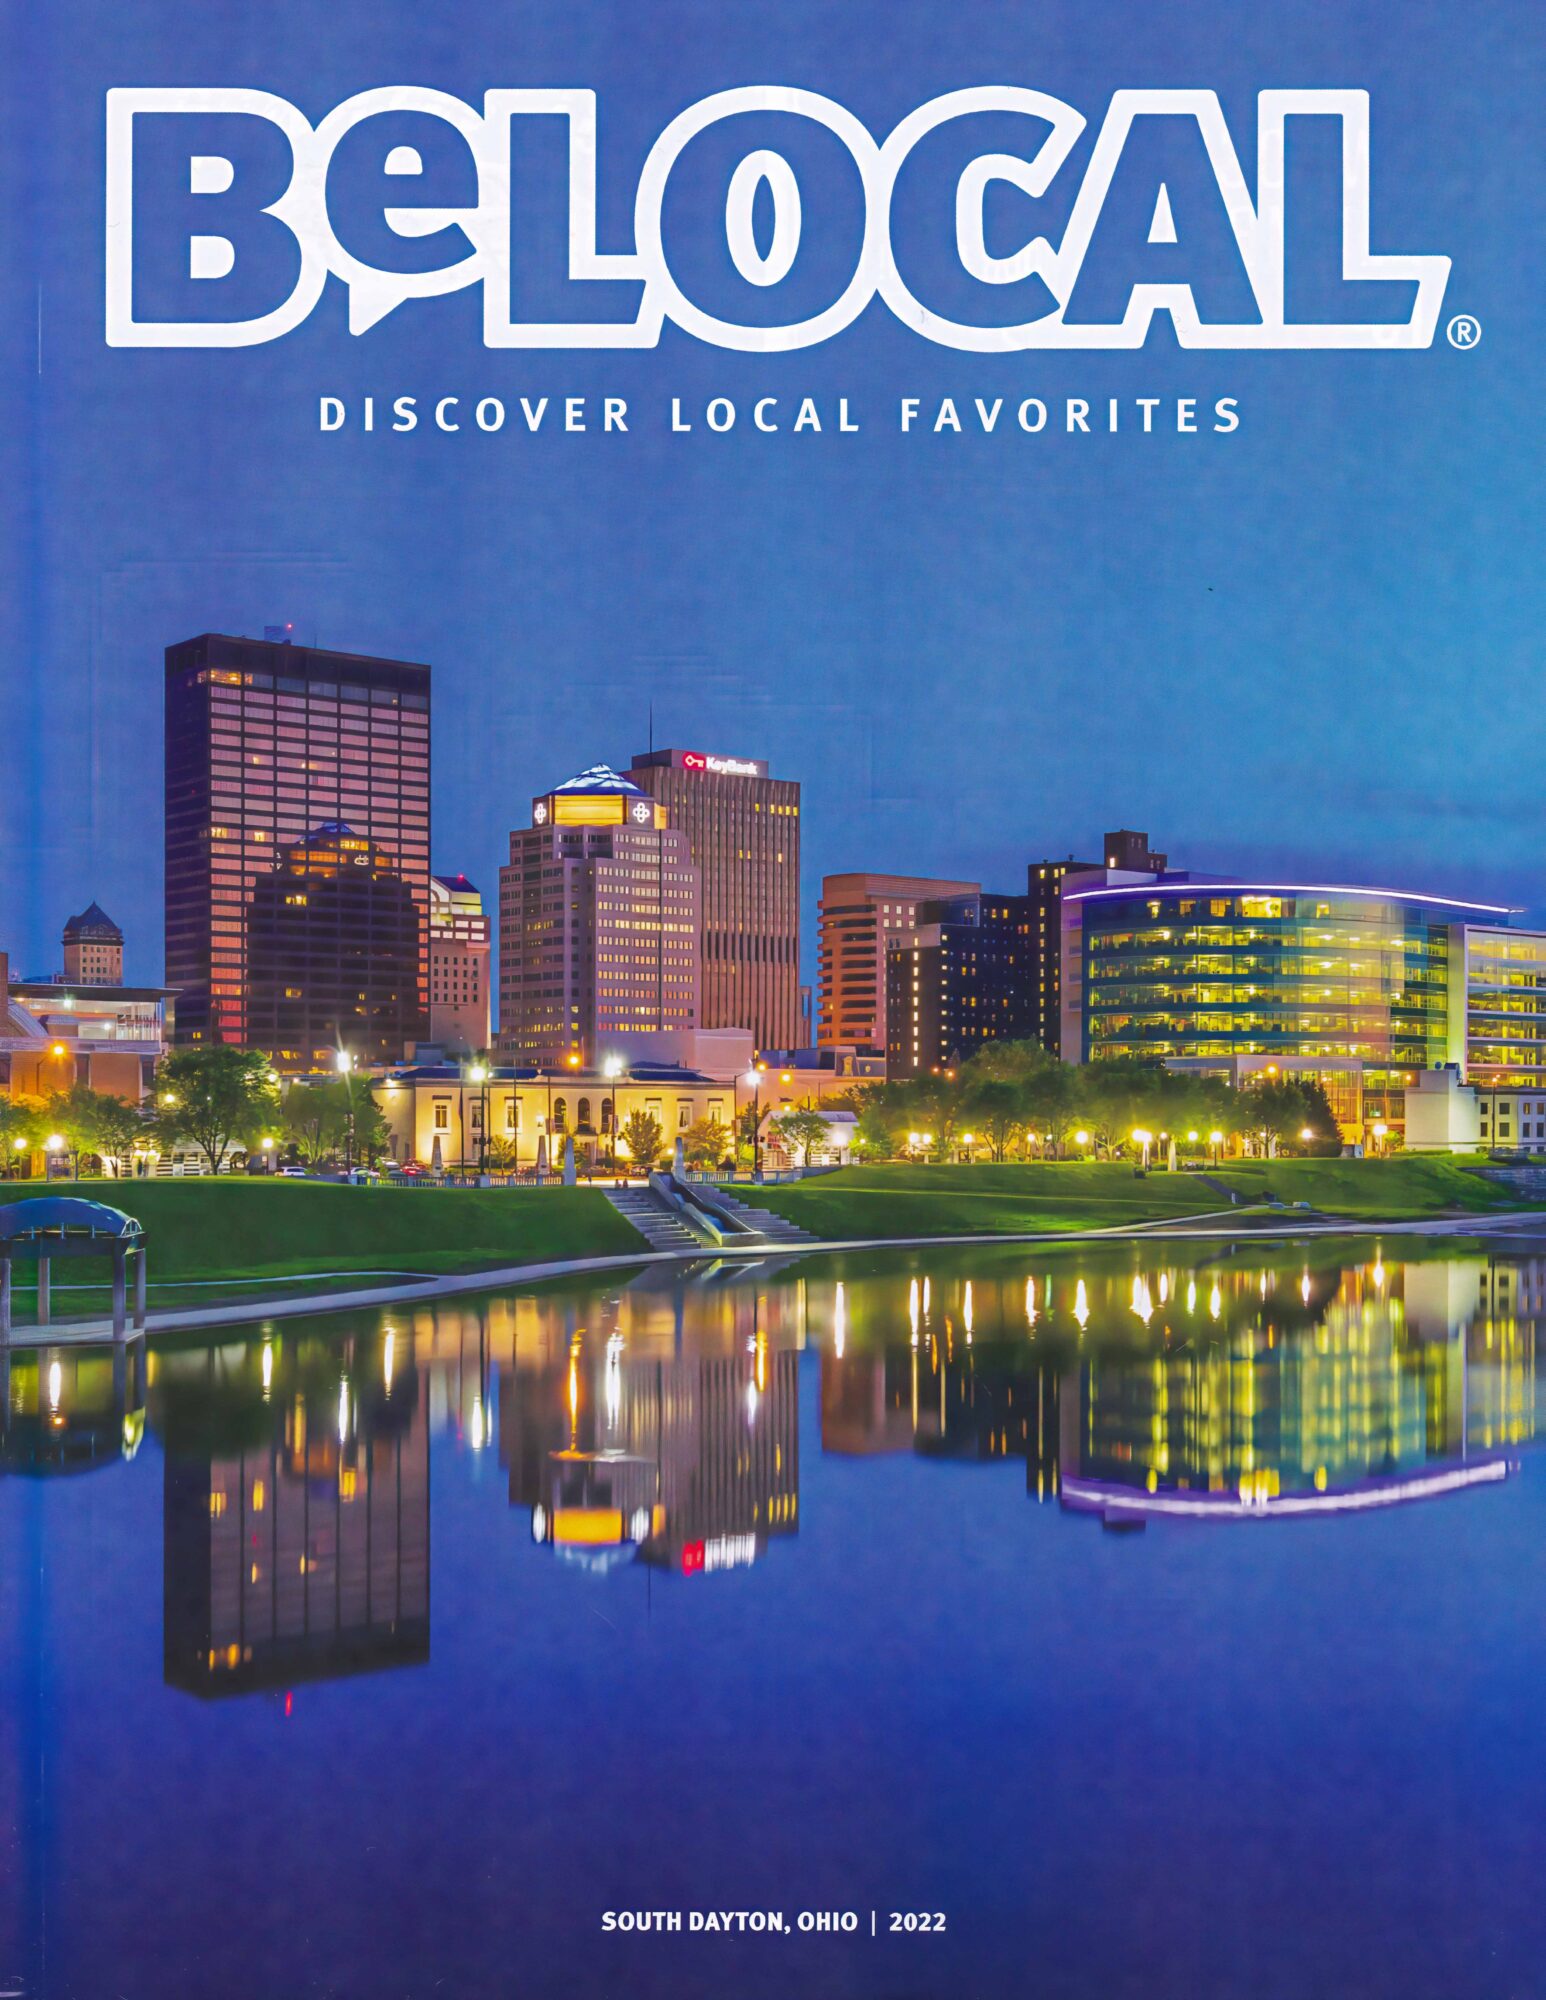 The cover image of BeLocal South Dayton Magazine which features my image, "Dayton Skyline at Twilight".